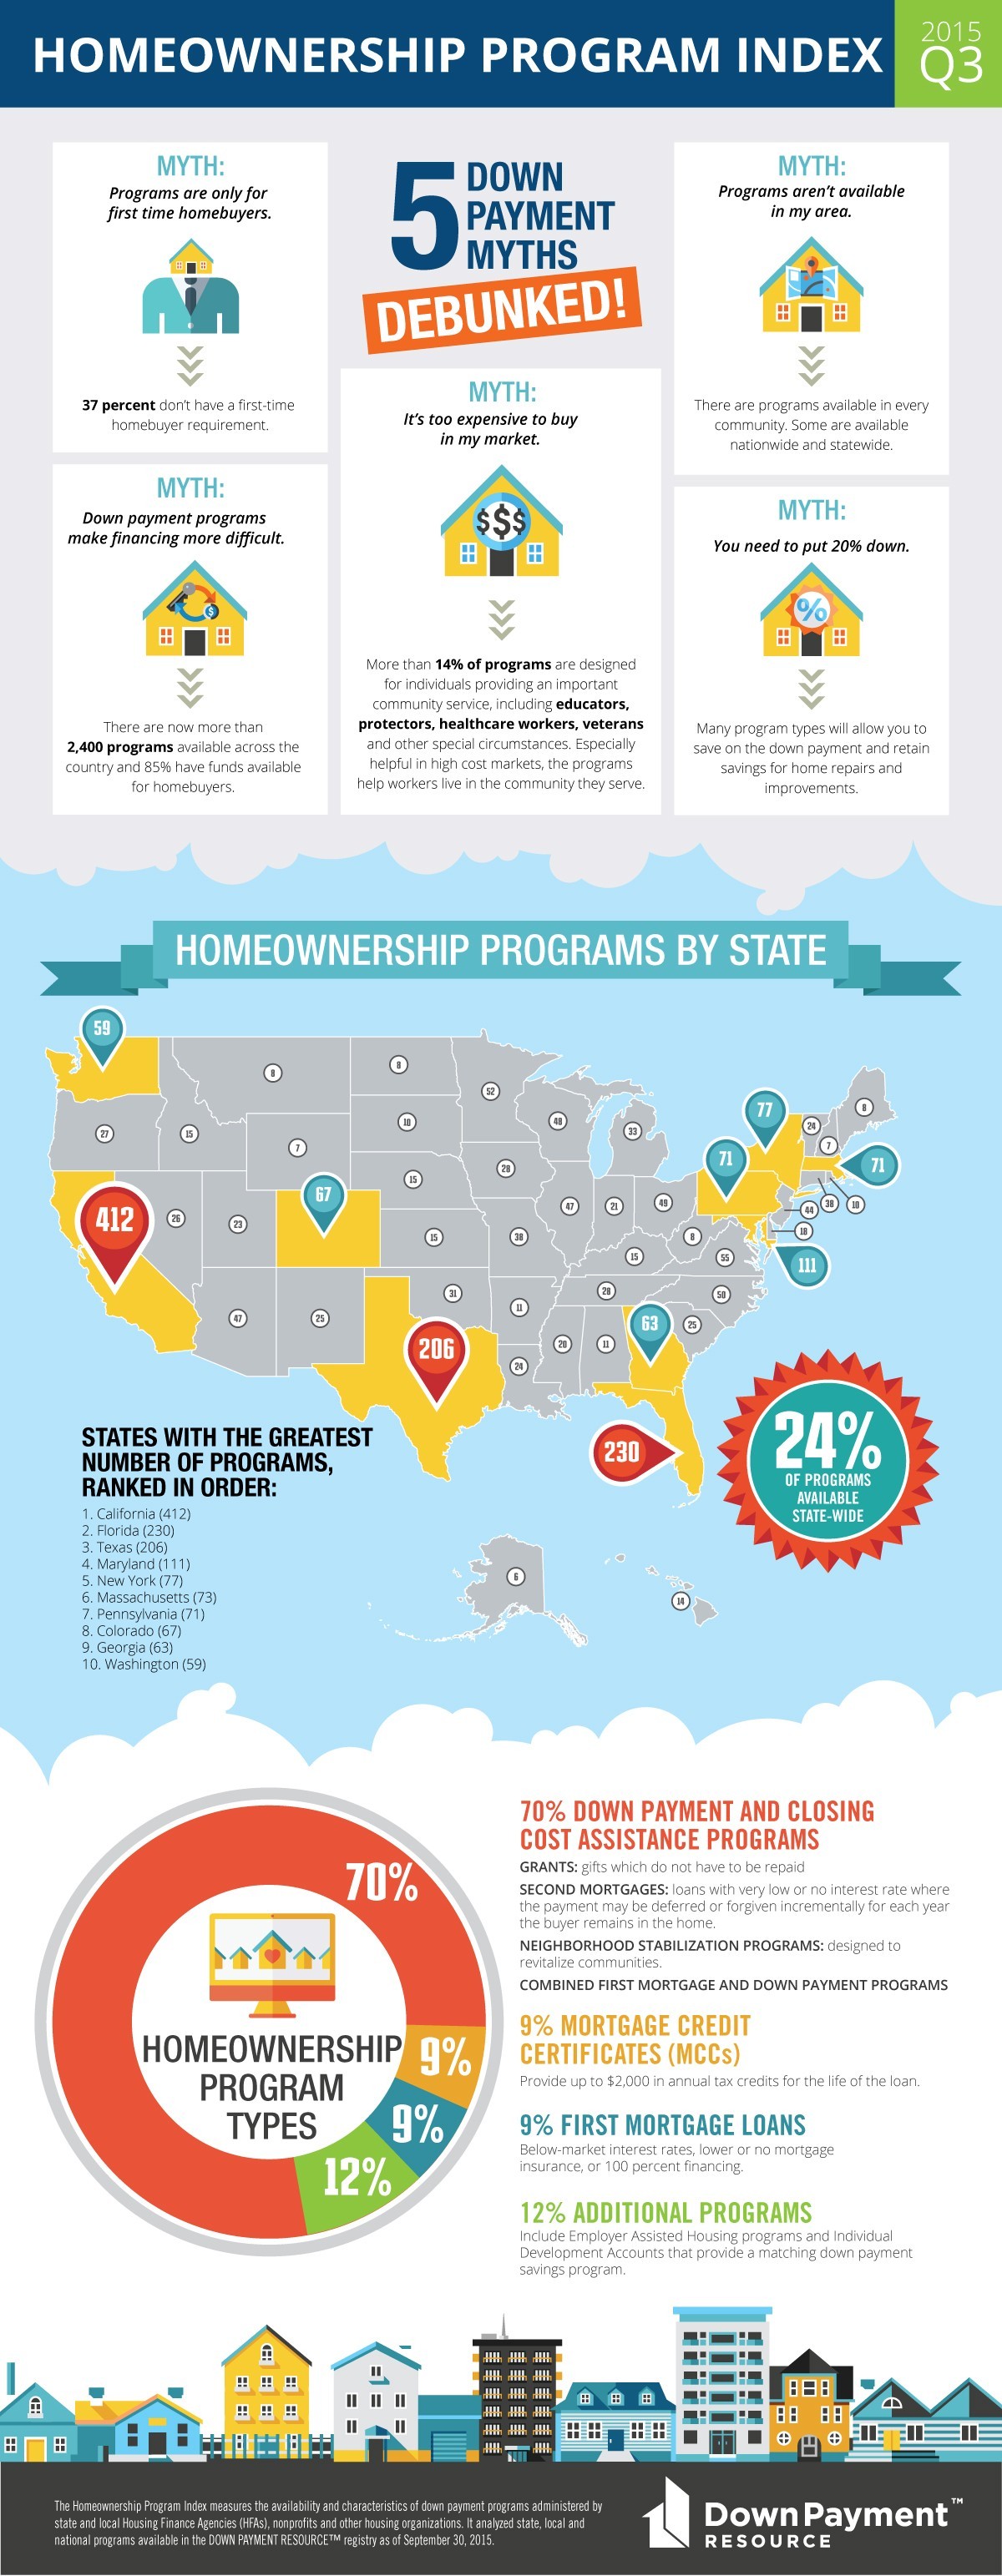 Infographic: 5 Down Payment Myths Debunked